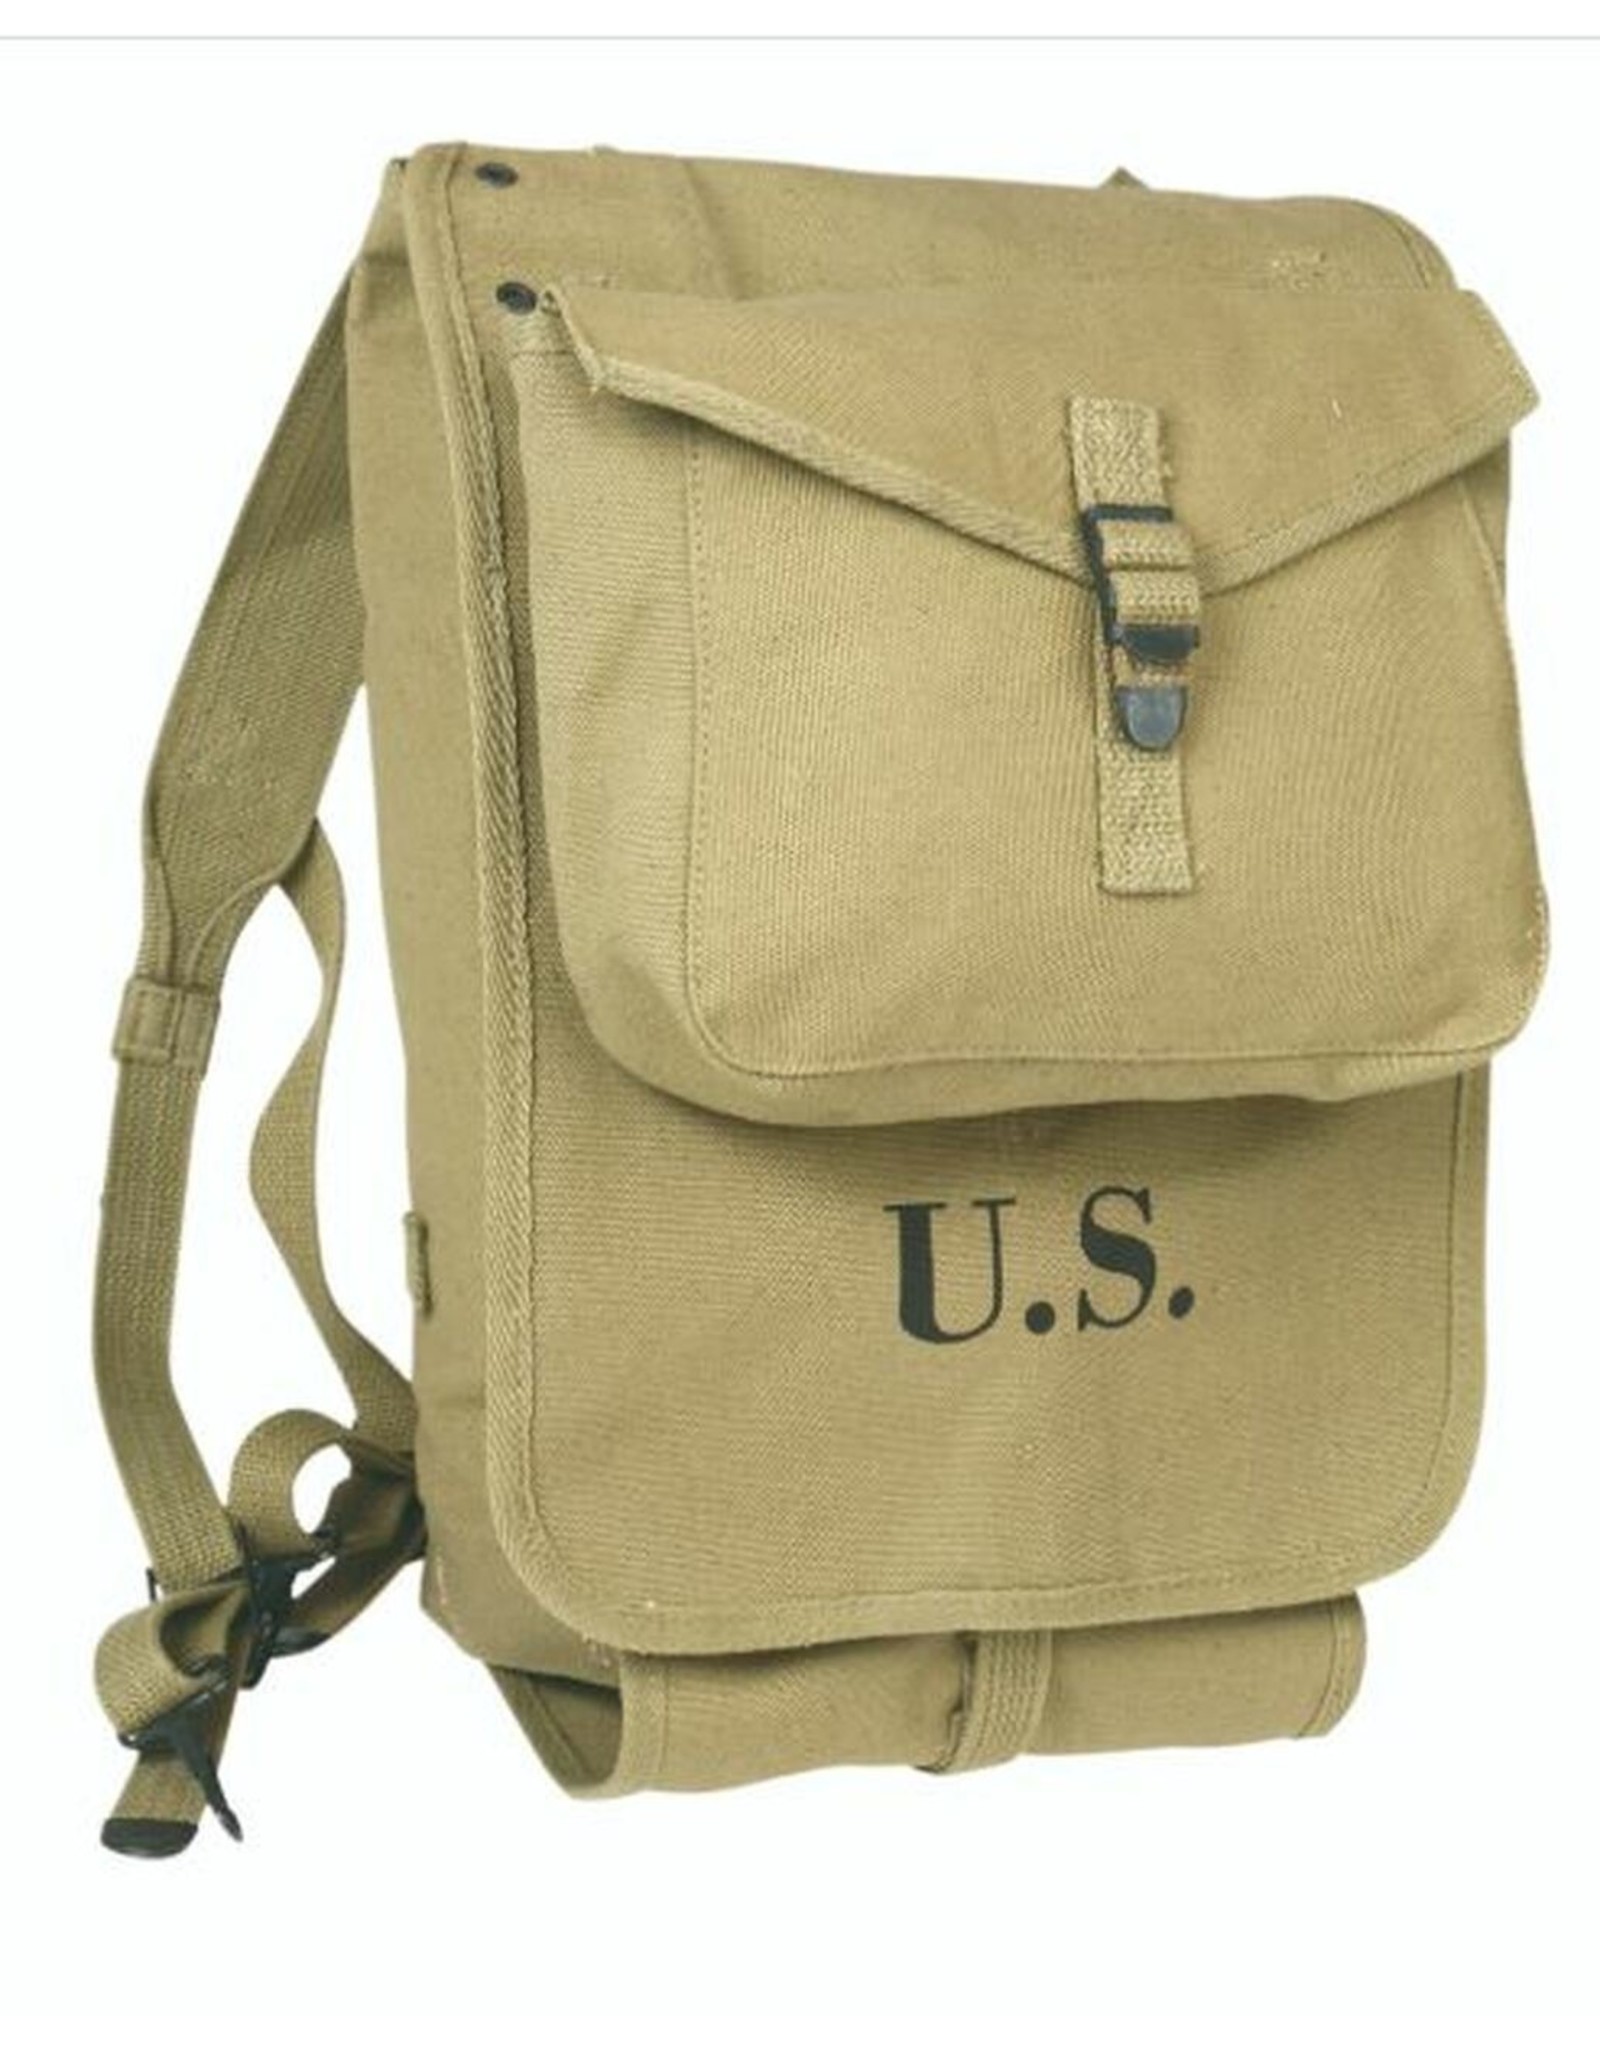 MIL-TEC US REPRO WWII M1928 HAVERSACK - NEW